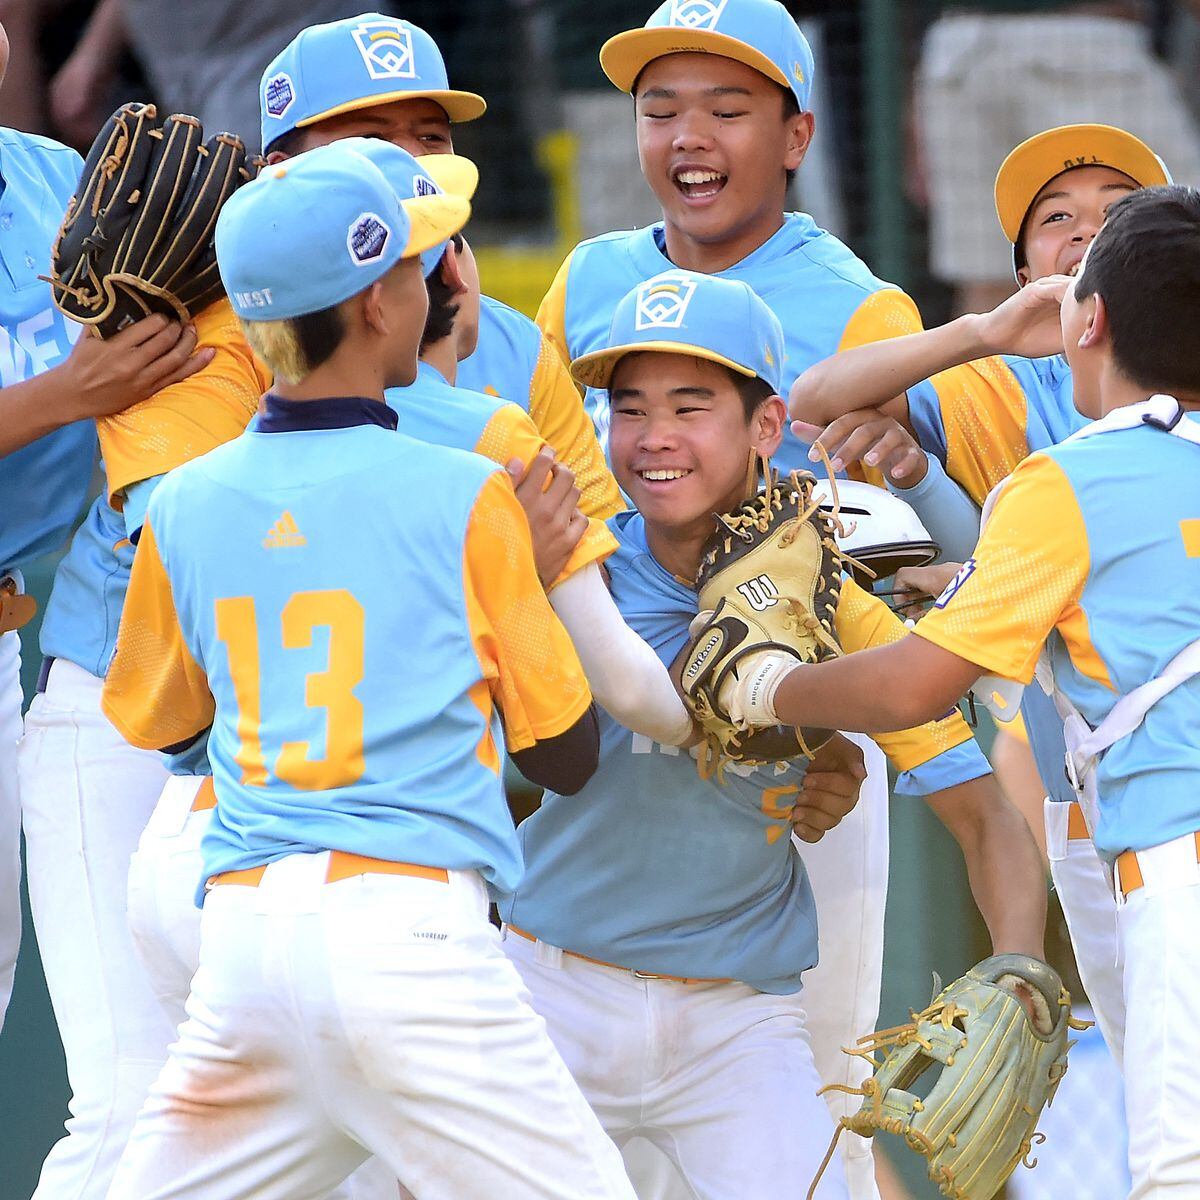 Past Little League World Series champions reflect on 'once-in-a